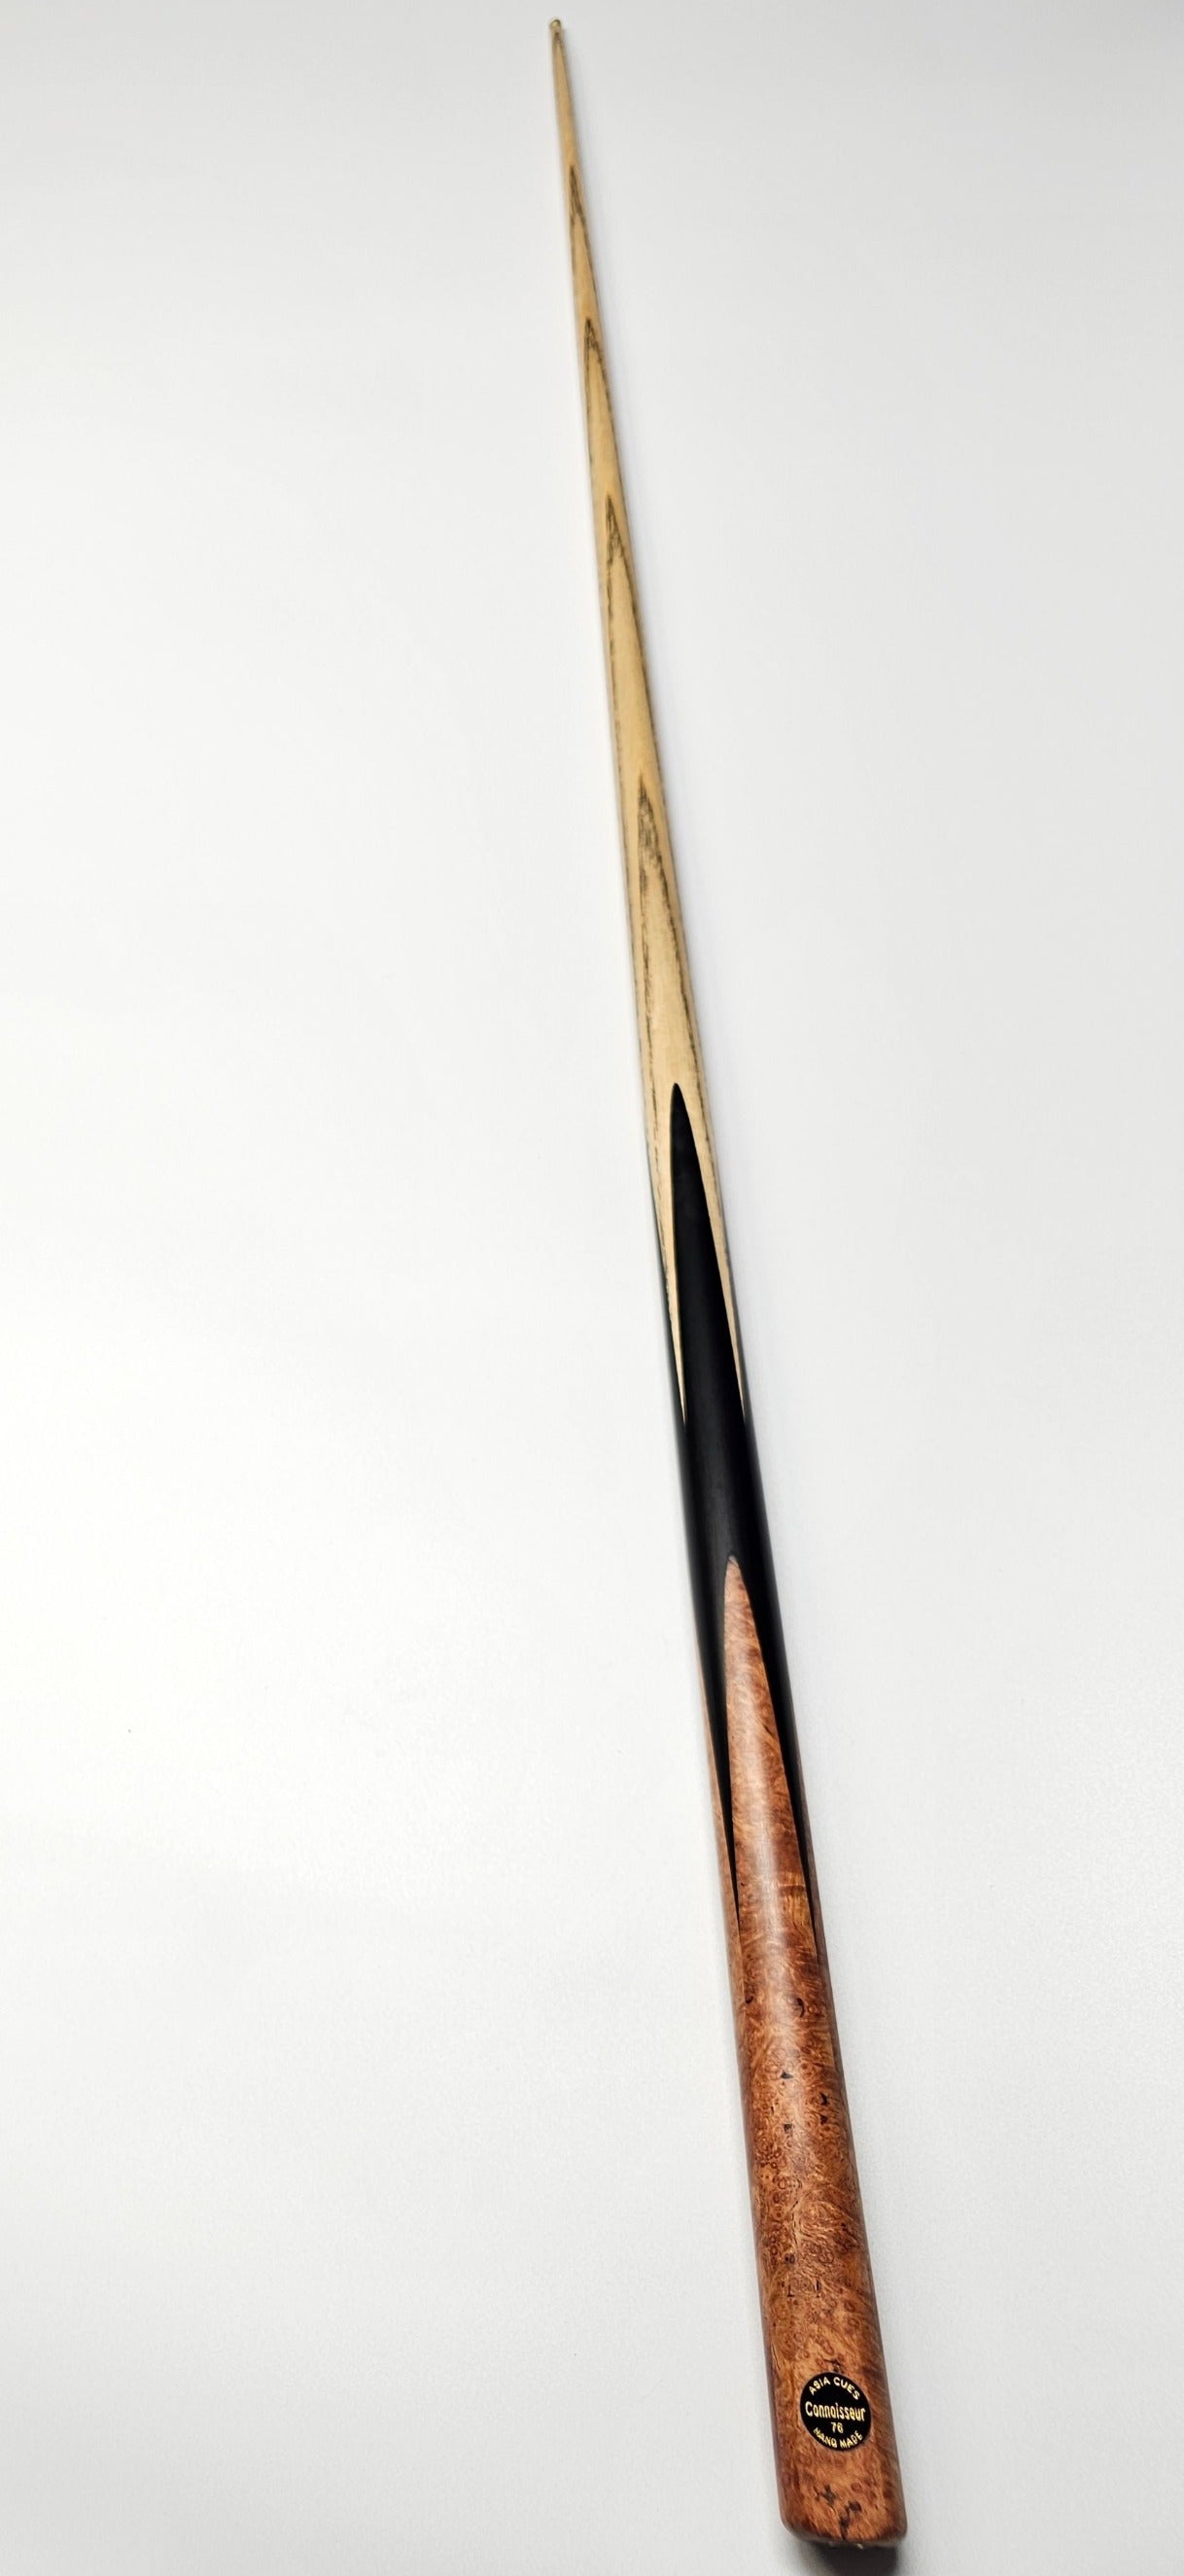 Asia Cues Connoisseurr 1 Piece Snooker Cue  Handmade Ebony Butt with 4 splices of Amboyna Burl. Full View View